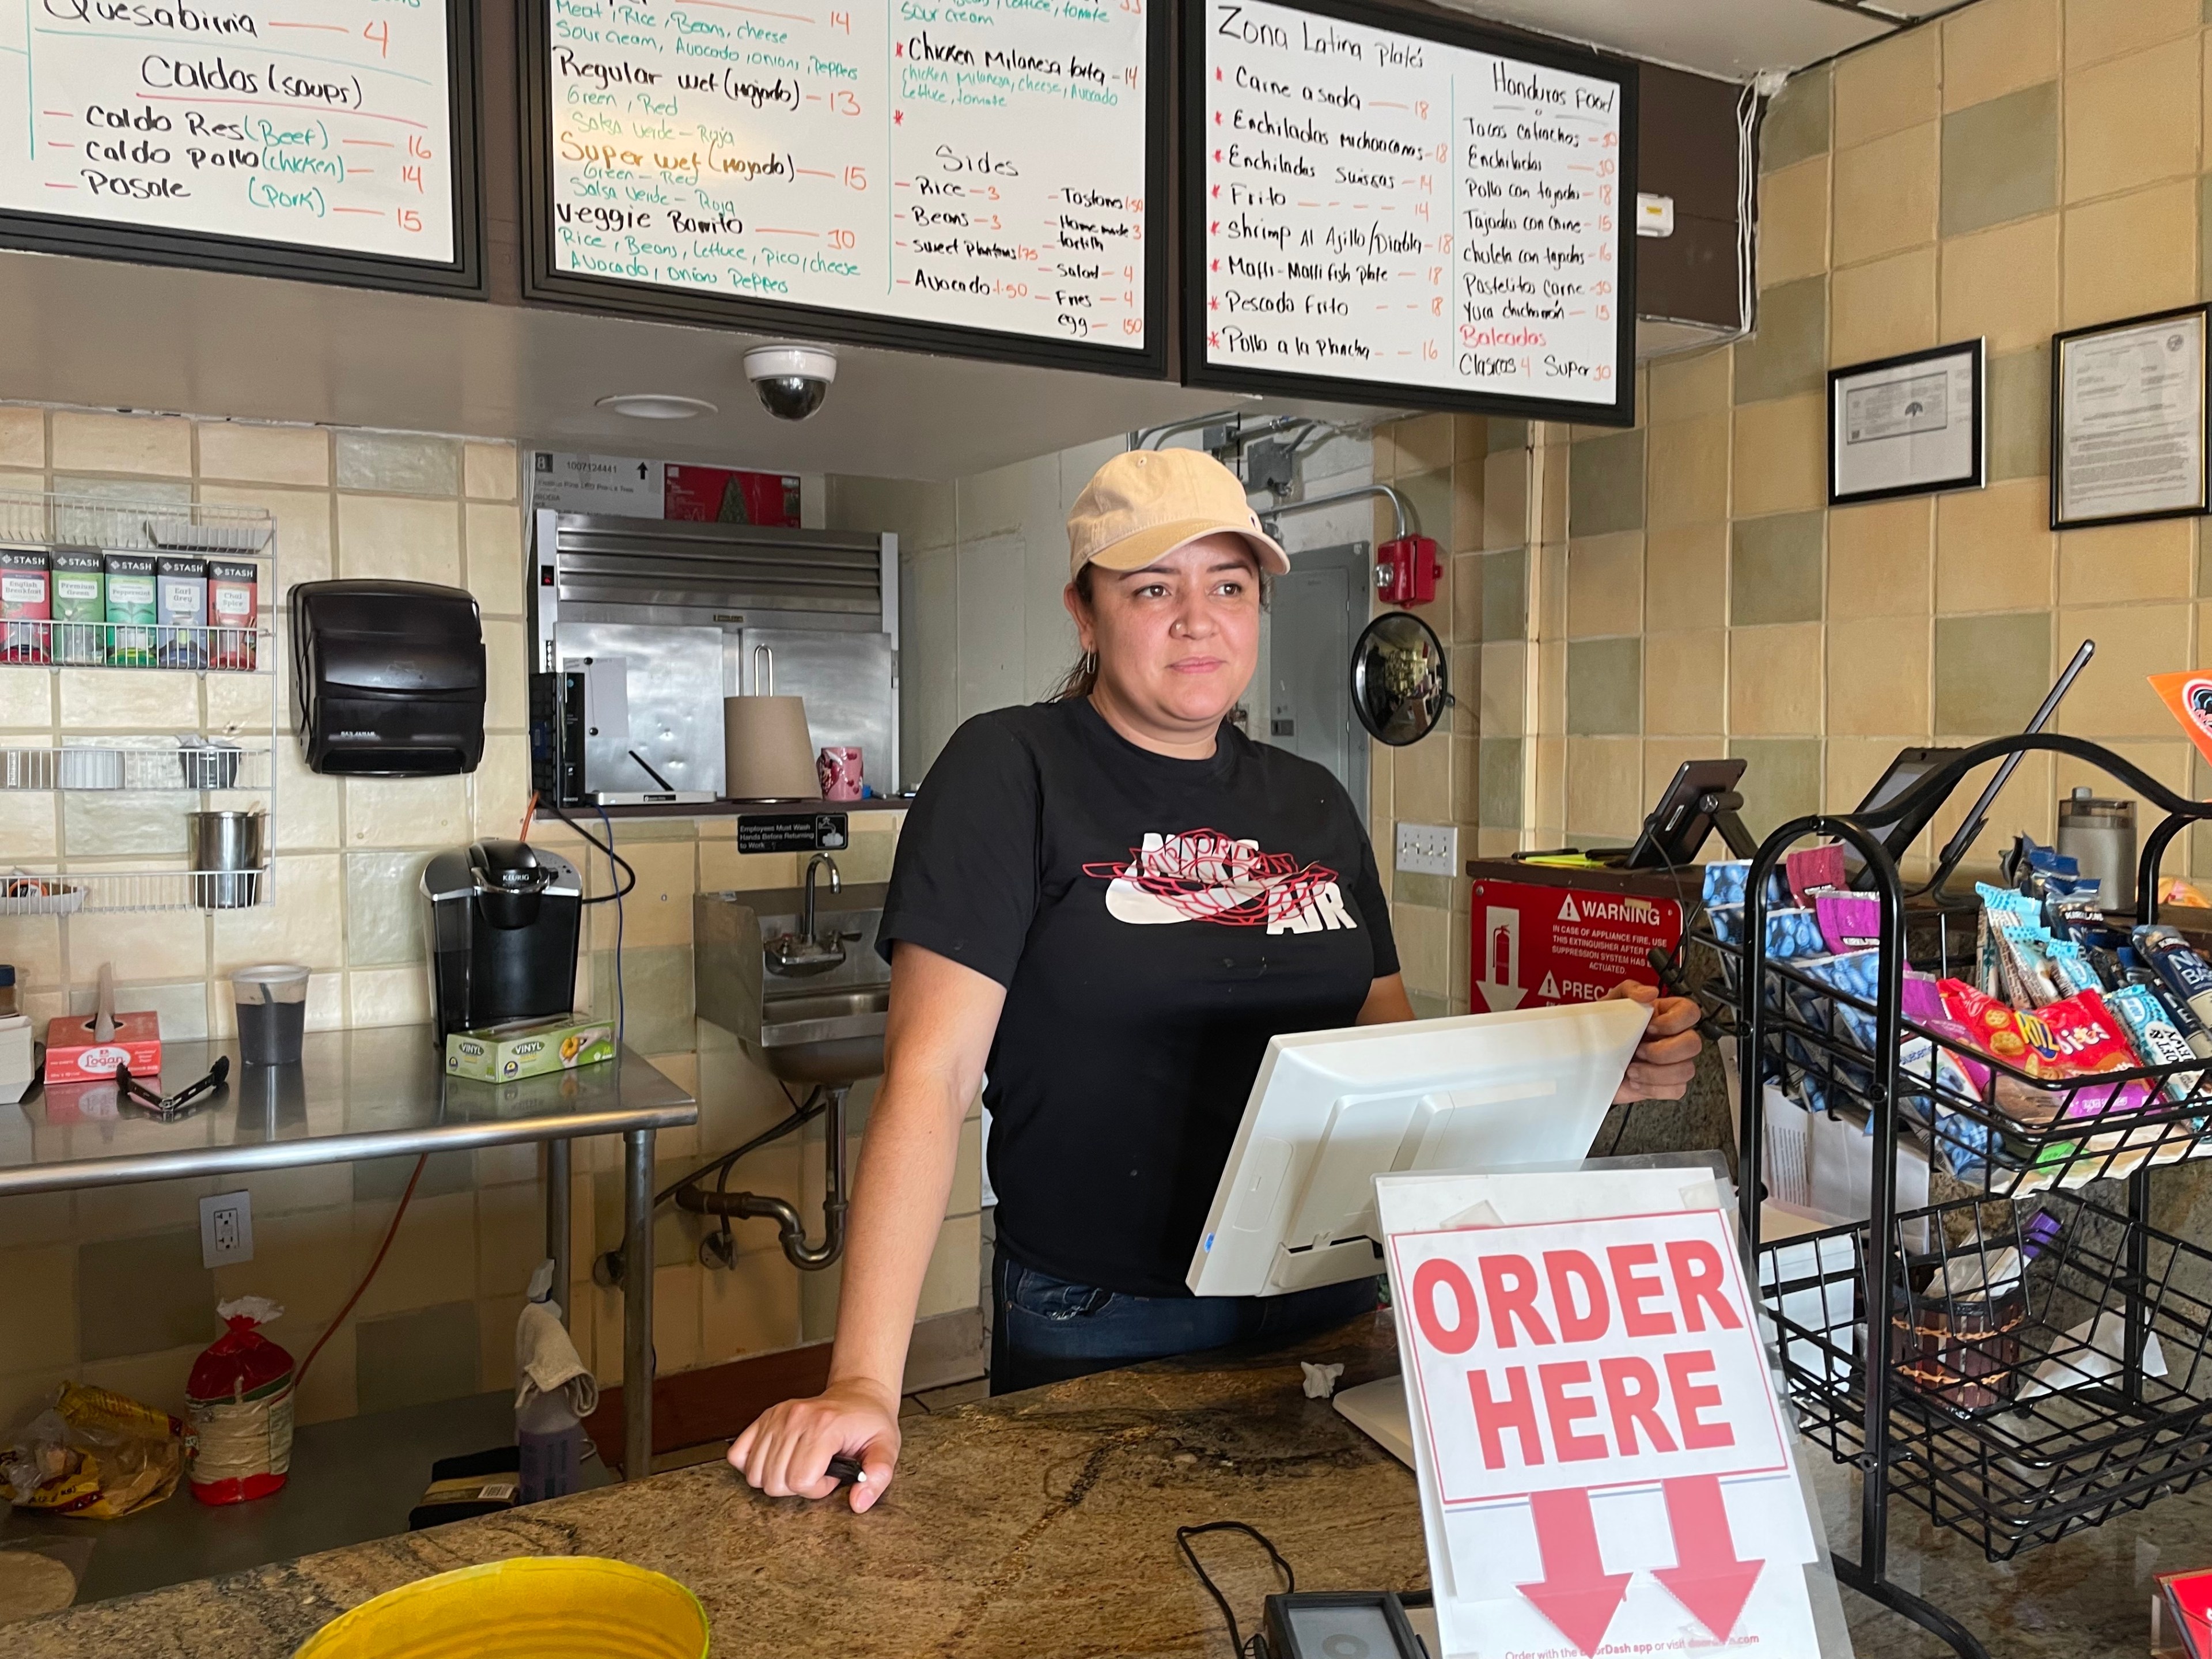 A woman stands behind the cash register at a taqueria.